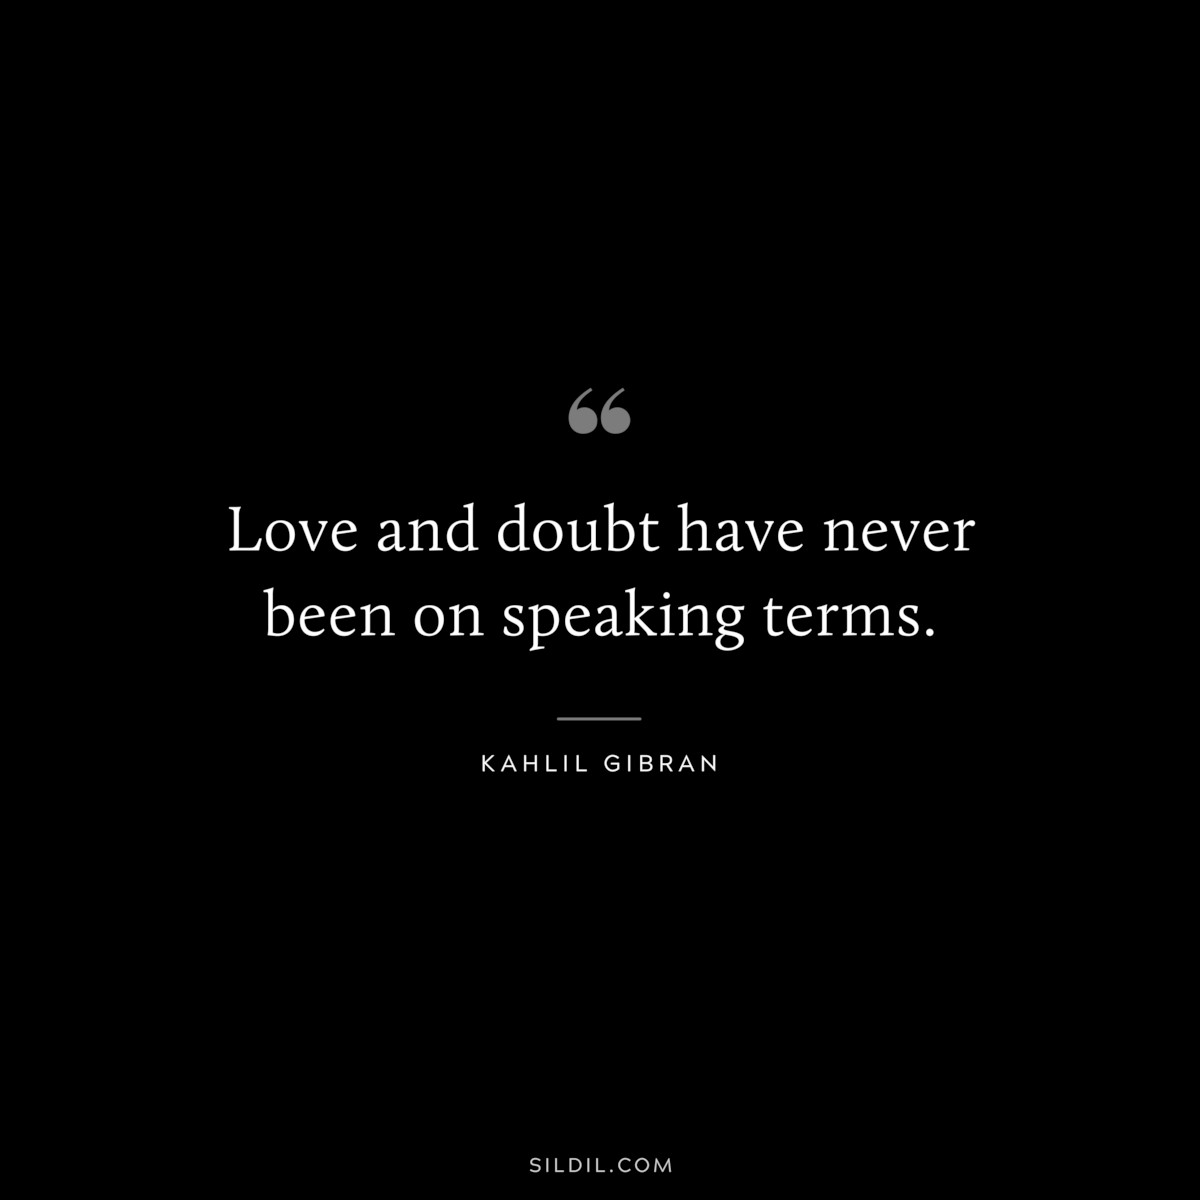 Love and doubt have never been on speaking terms. ― Kahlil Gibran